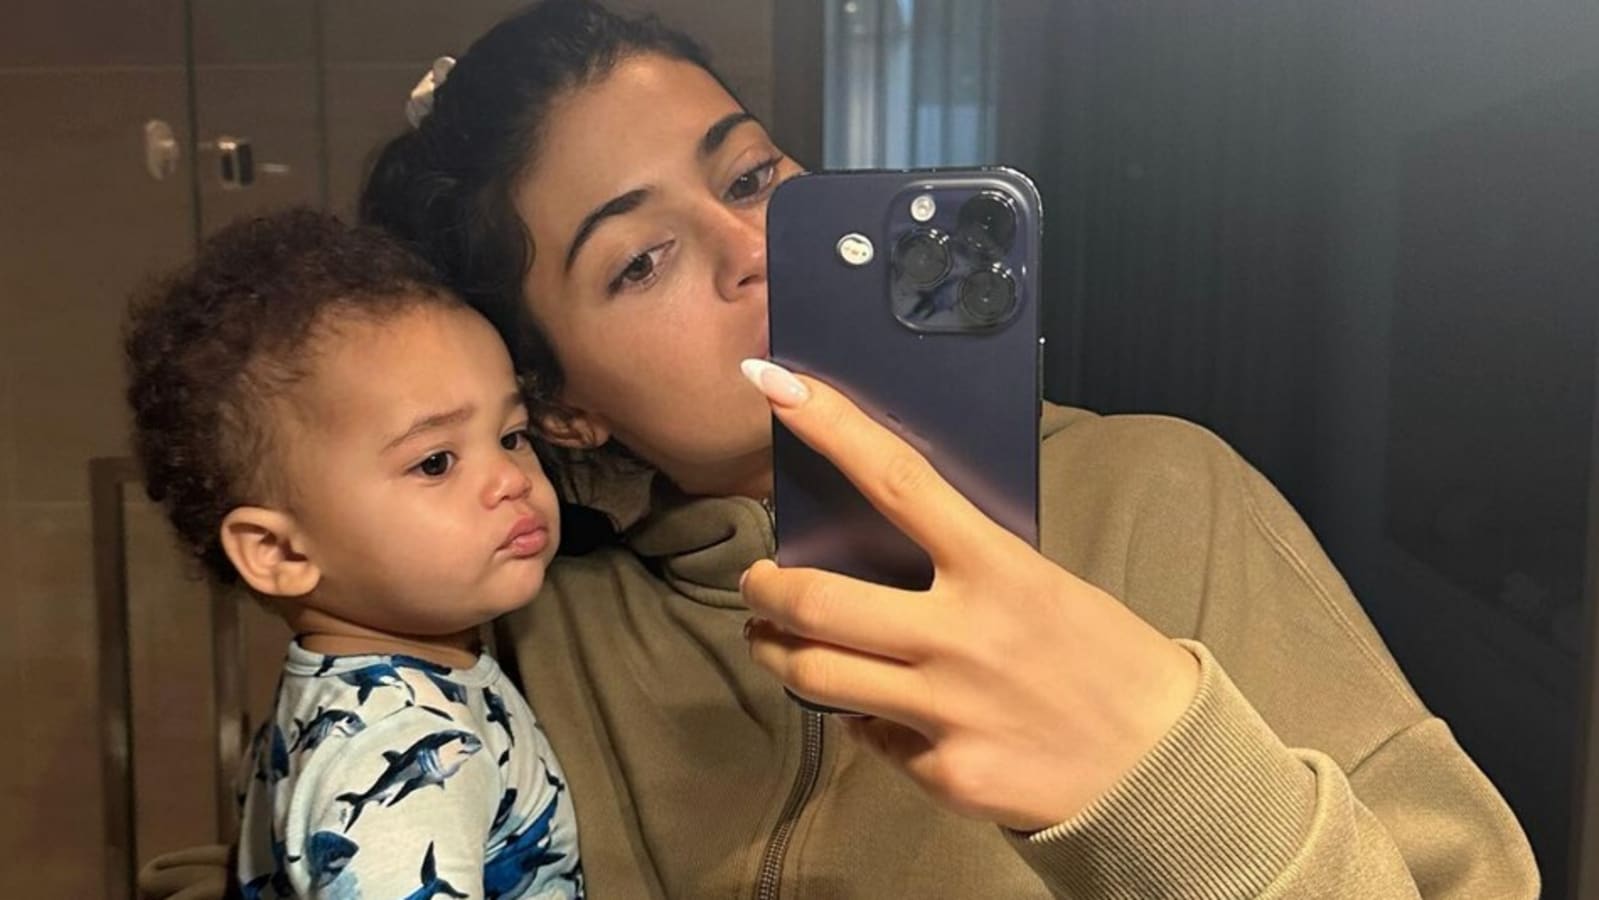 Kylie Jenner reveals name of her baby boy, drops adorable new photos; Khloe Kardashian and Kris Jenner react